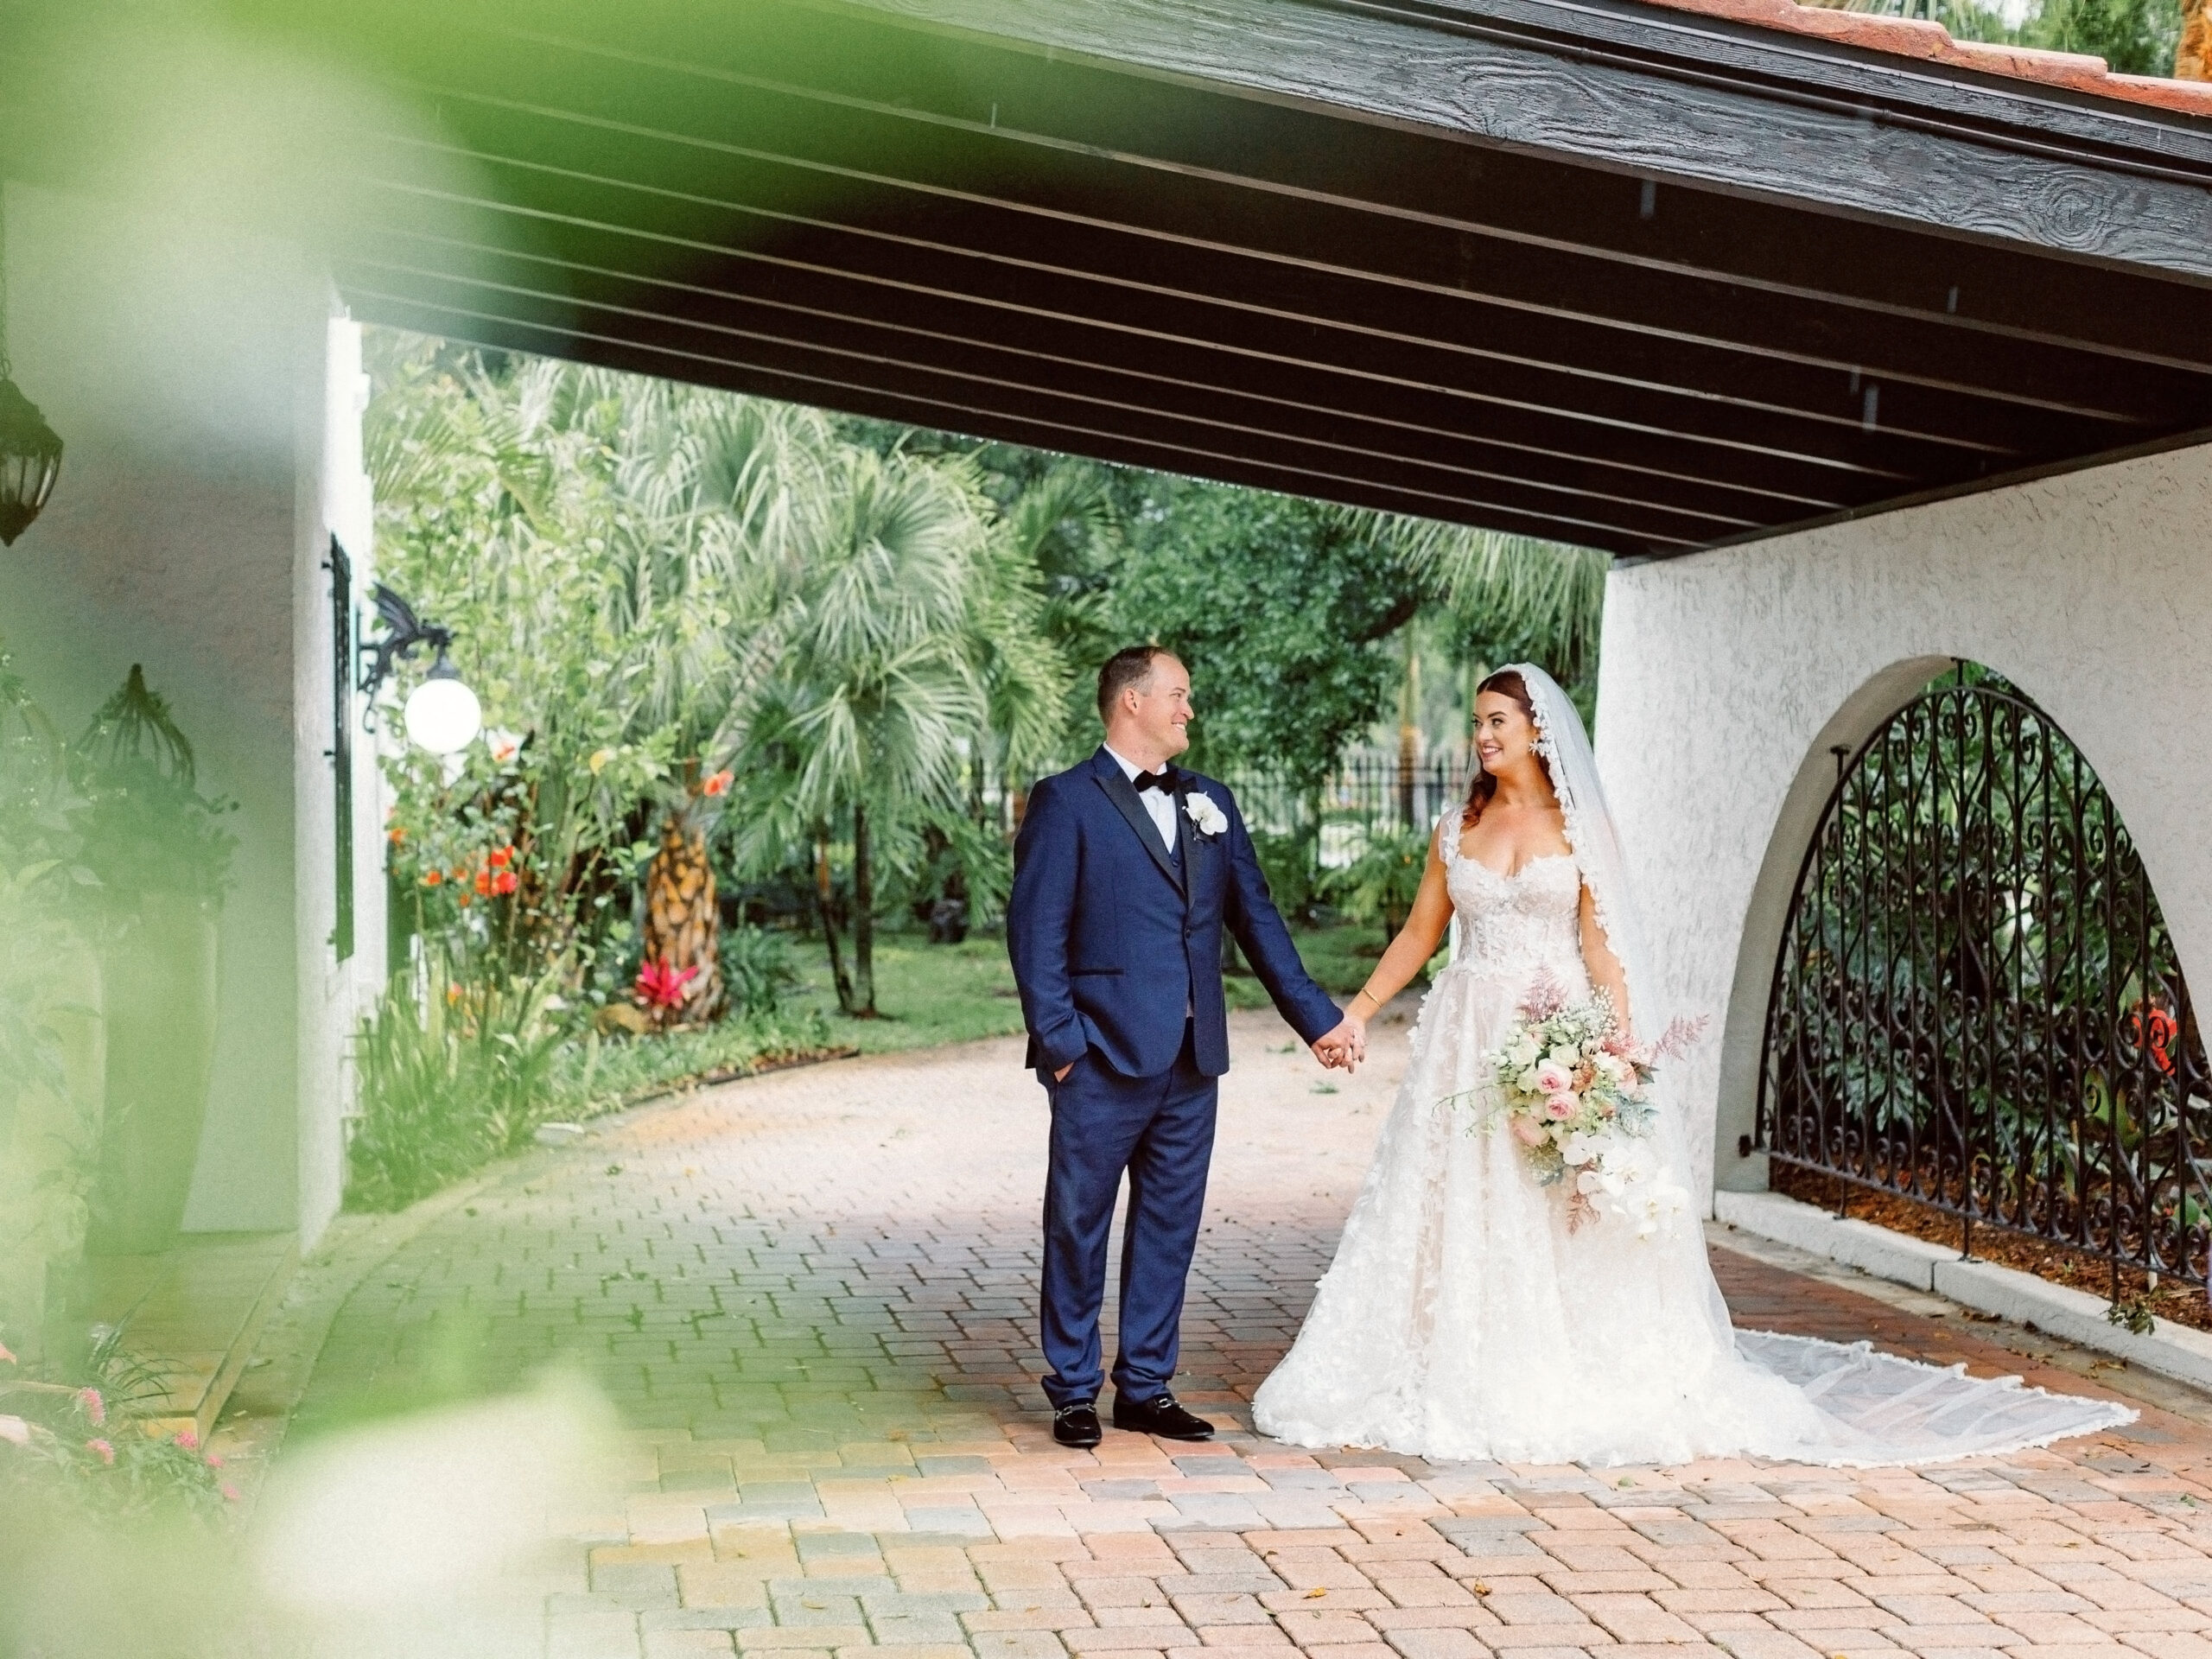 Fairytale Red and Pink Private Residence Wedding, Bride and Groom Wedding Portrait | Tampa Bay Wedding Photographer Dewitt for Love Photography